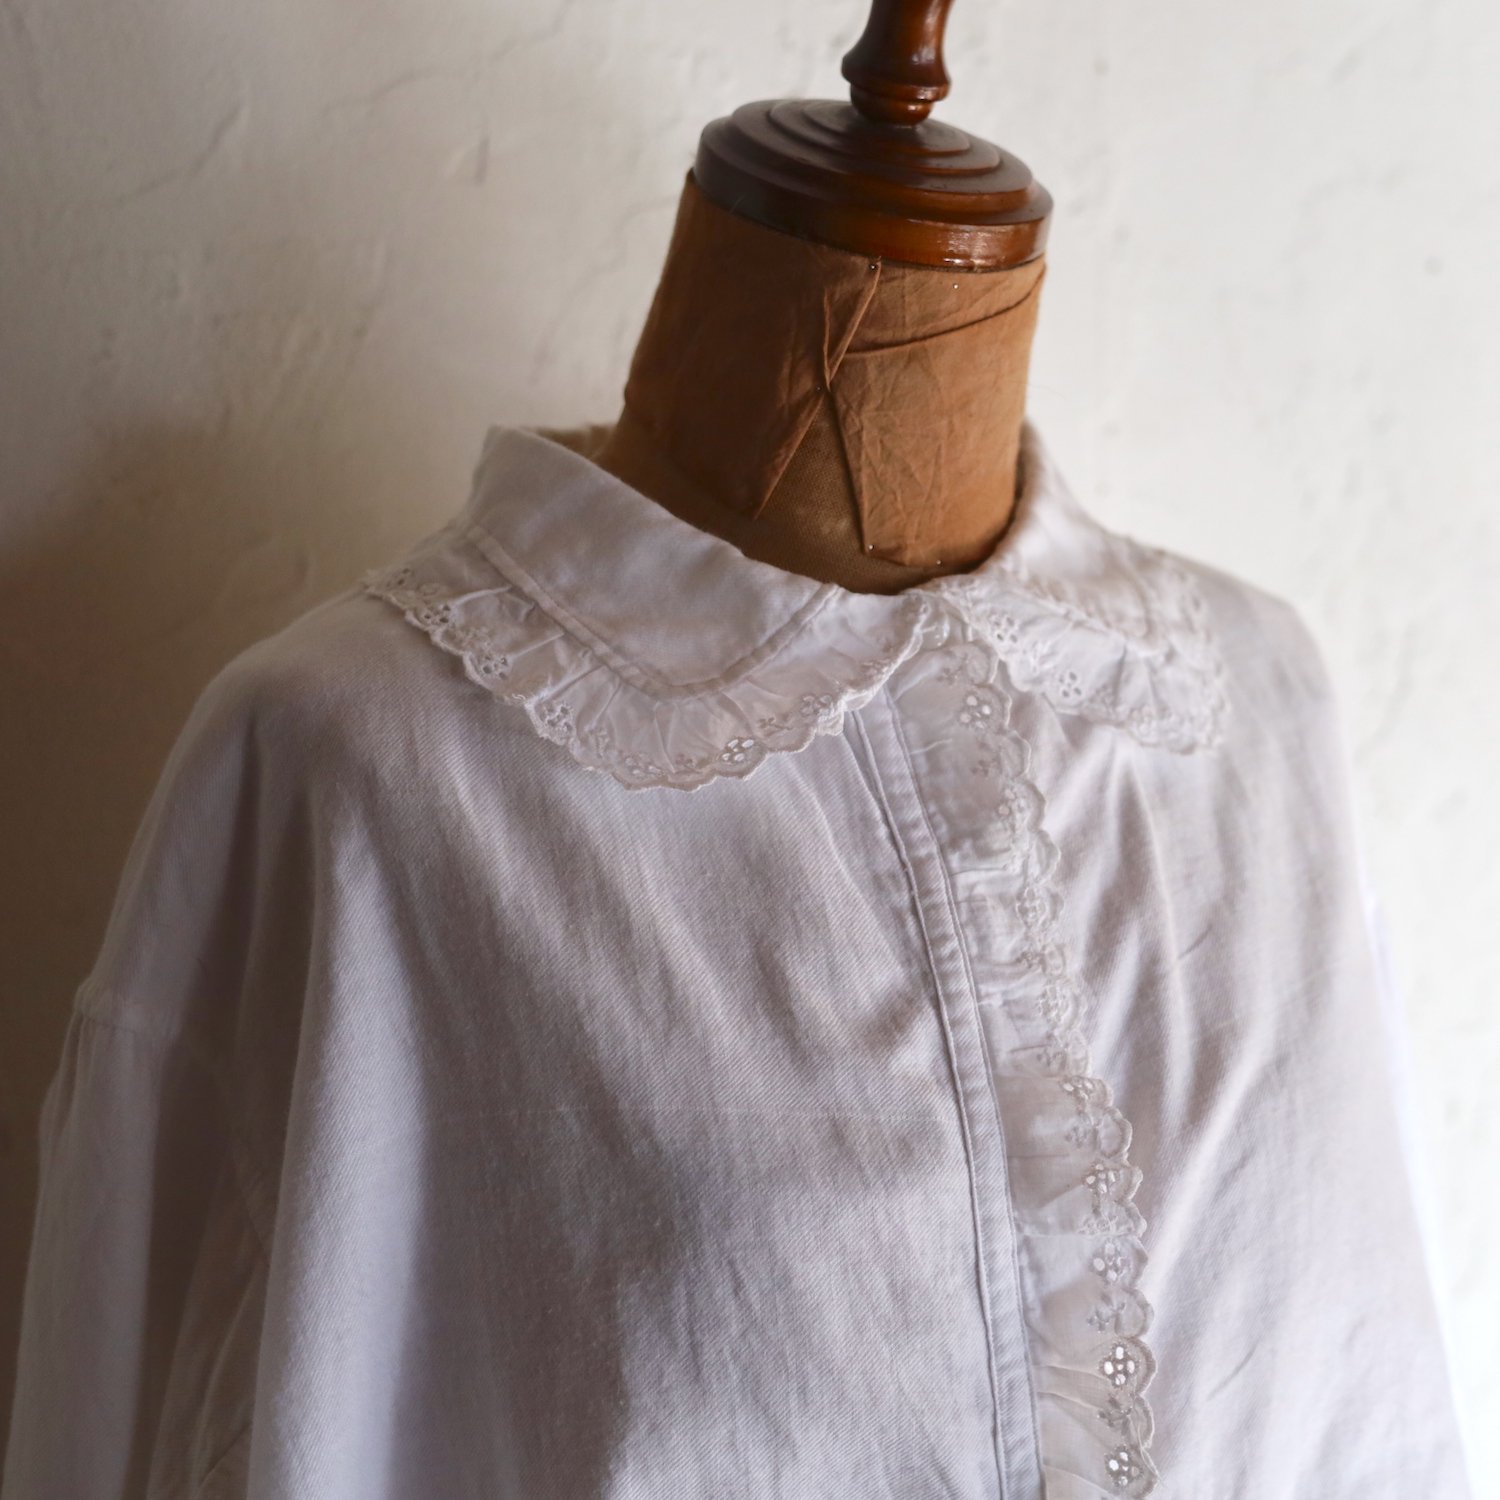 vintage cotton blouse from FRANCE / 花模様のフリルブラウス - caikot